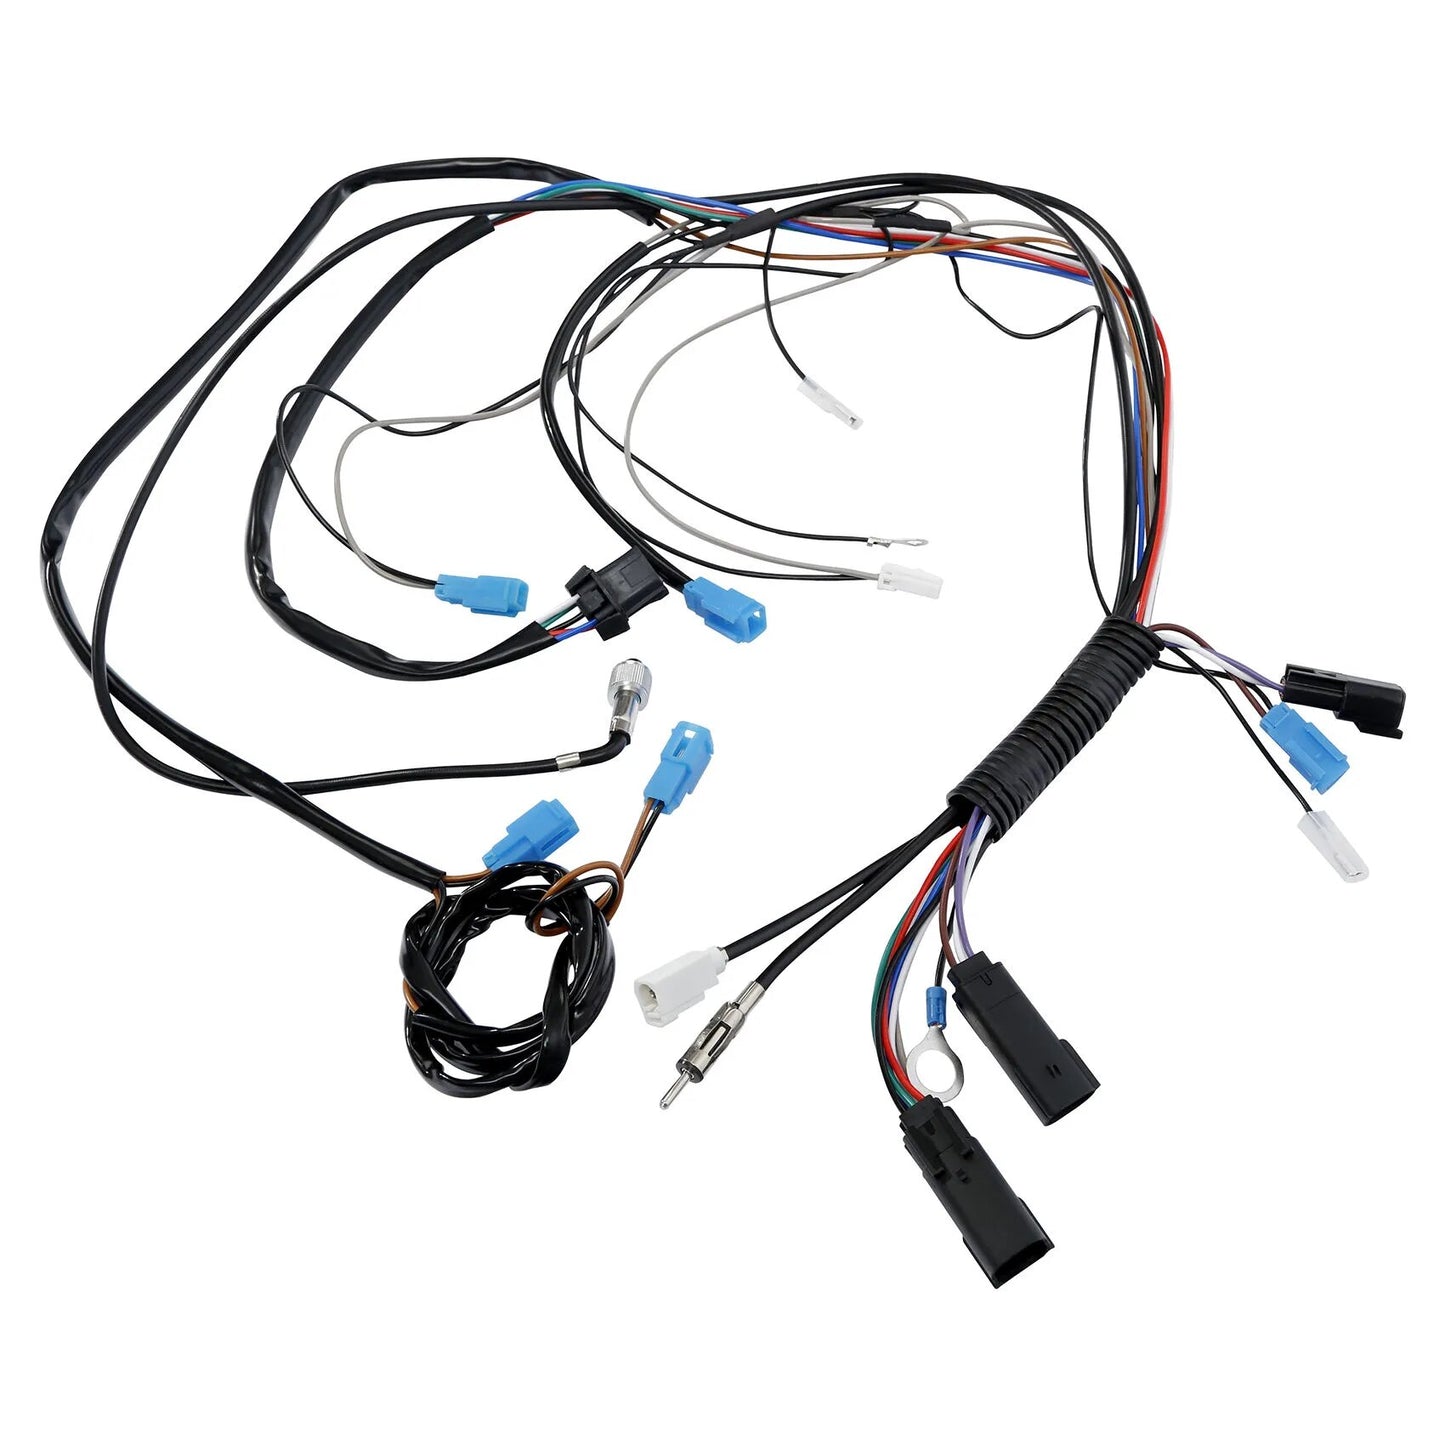 Voodoo Cycle House Tour Pack Wiring Harness For Harley-Davidson Touring Models Street Glide Road King 2014-UP